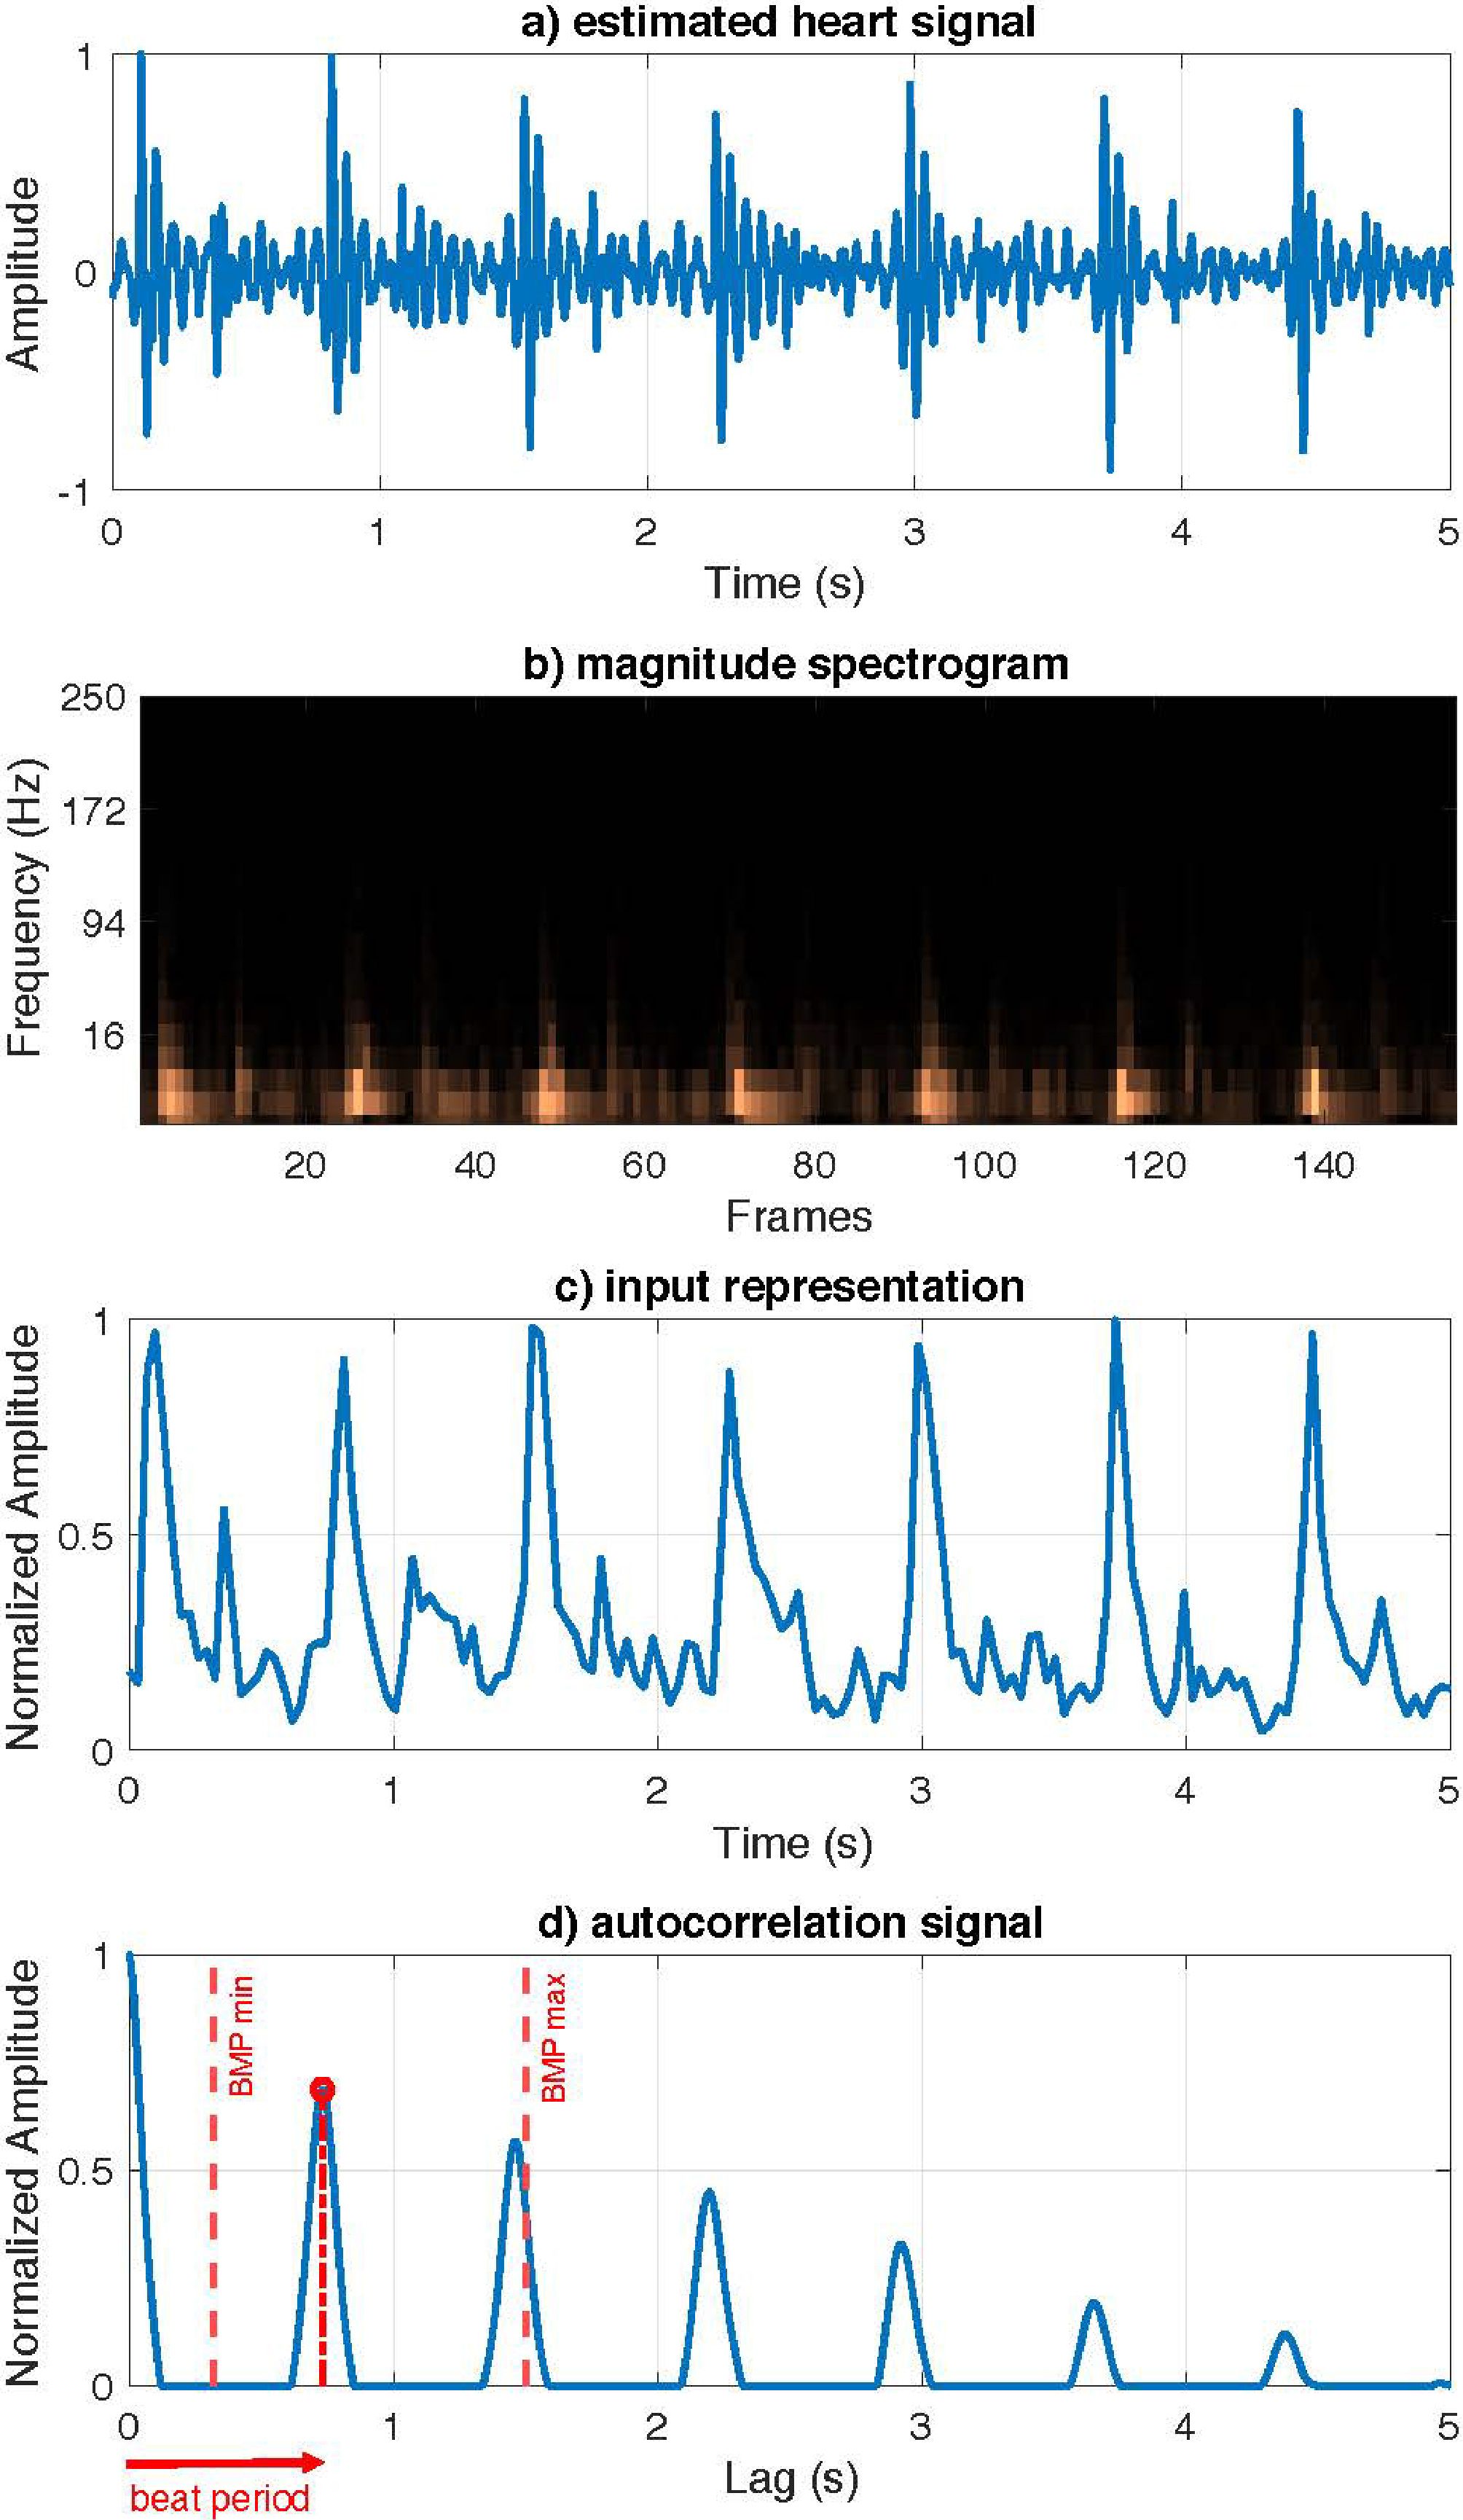 Proposed HR estimation model. a) Input estimated heart signal. b) Magnitude spectrogram of the estimated heart signal. c) Euclidean norm of magnitude spectrogram. d) Autocorrelation function with the beat period.